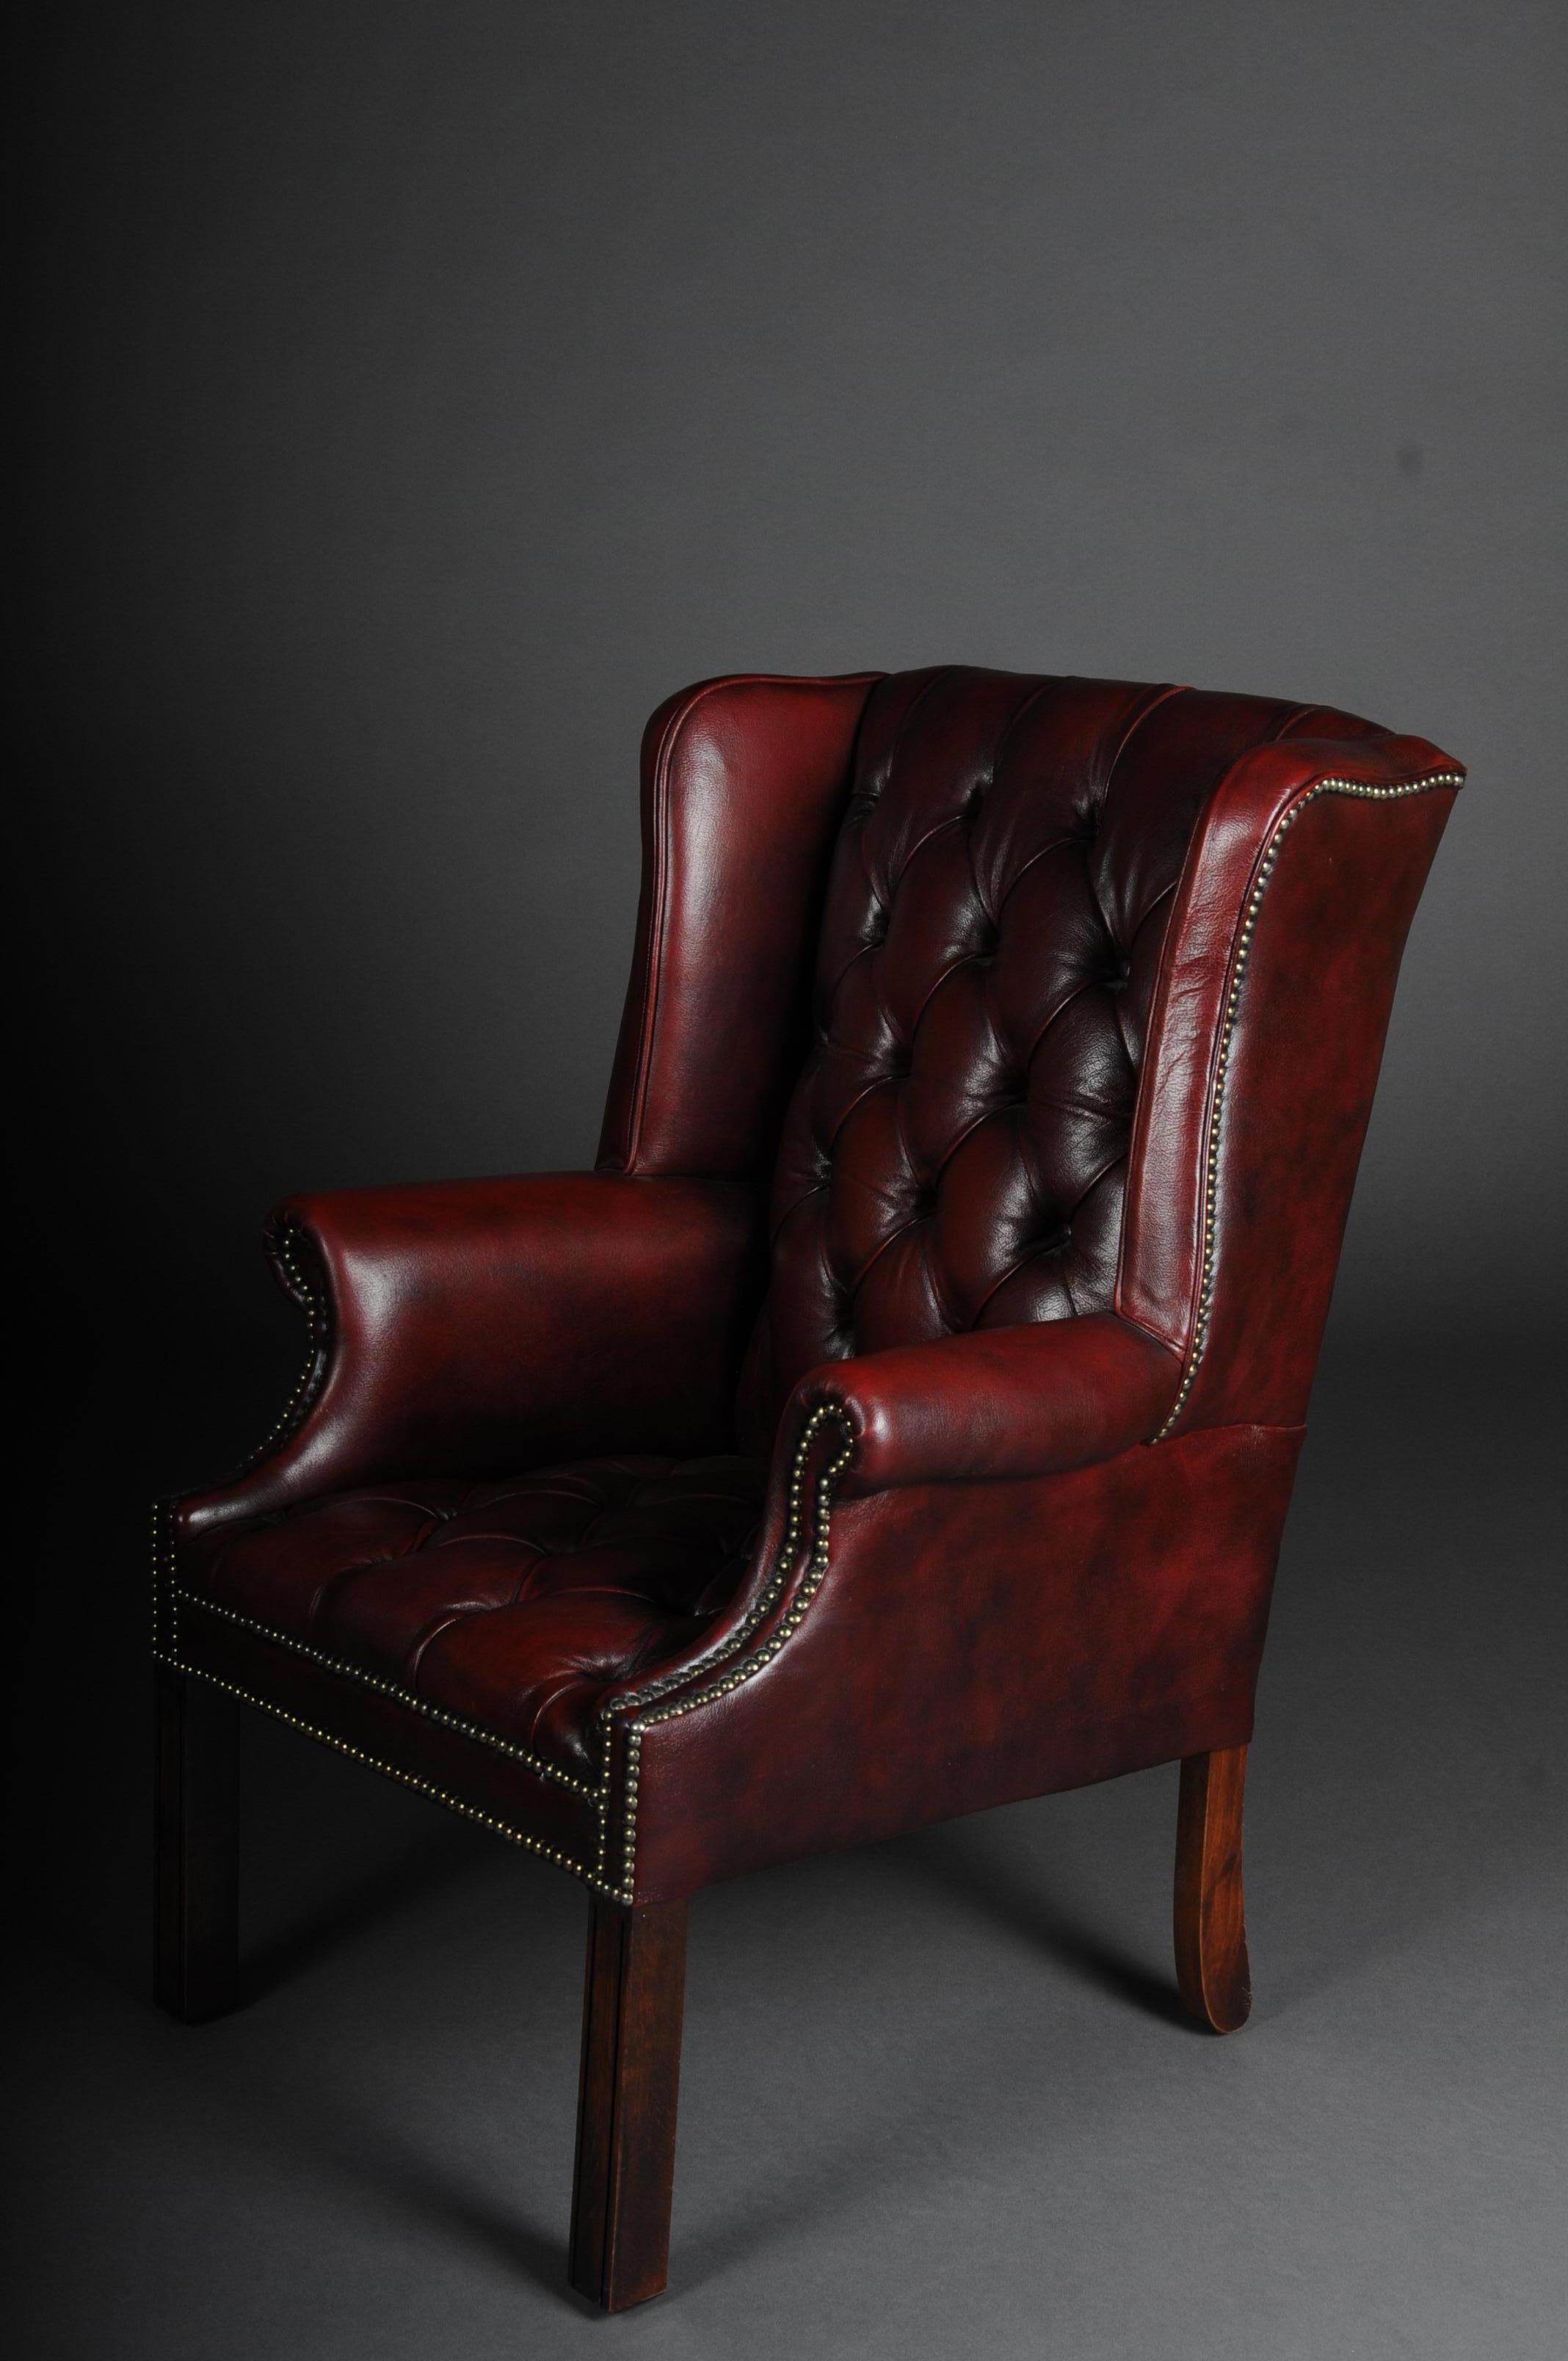 20th Century Classic English Chesterfield Earsback Chair, Leather 1